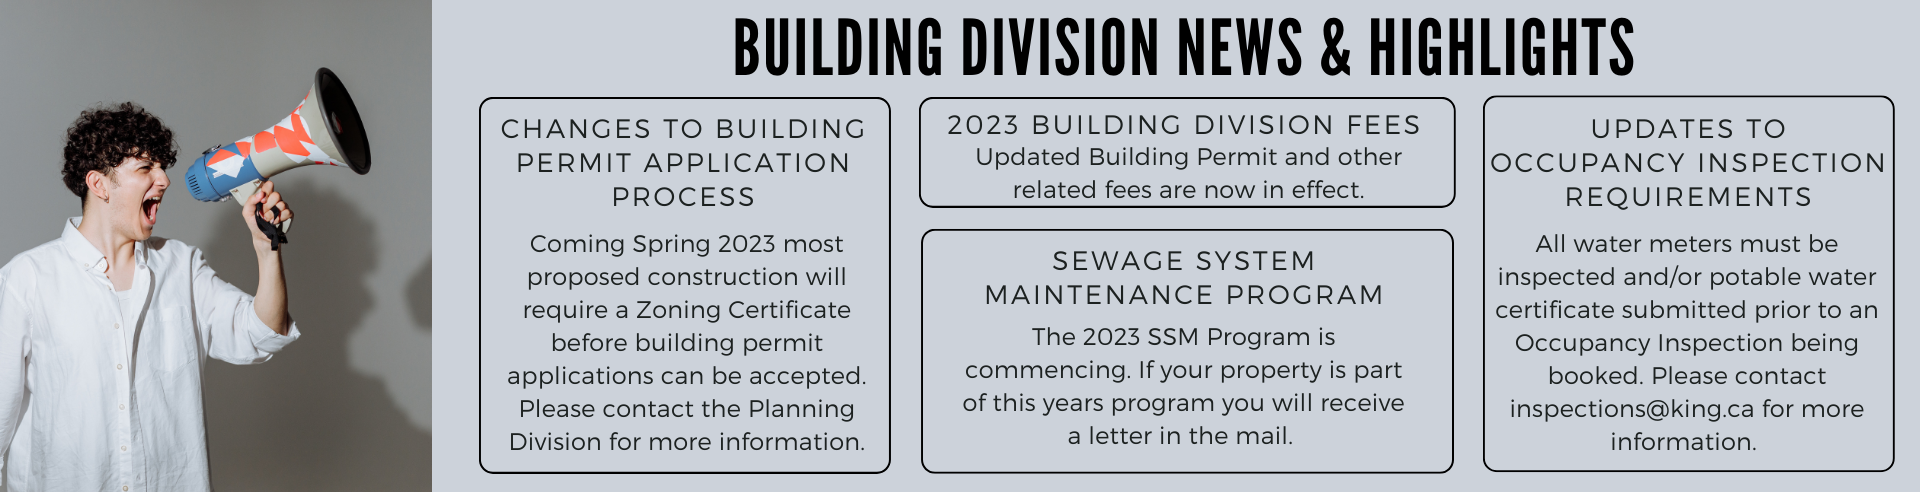 Building Division News & Highlights